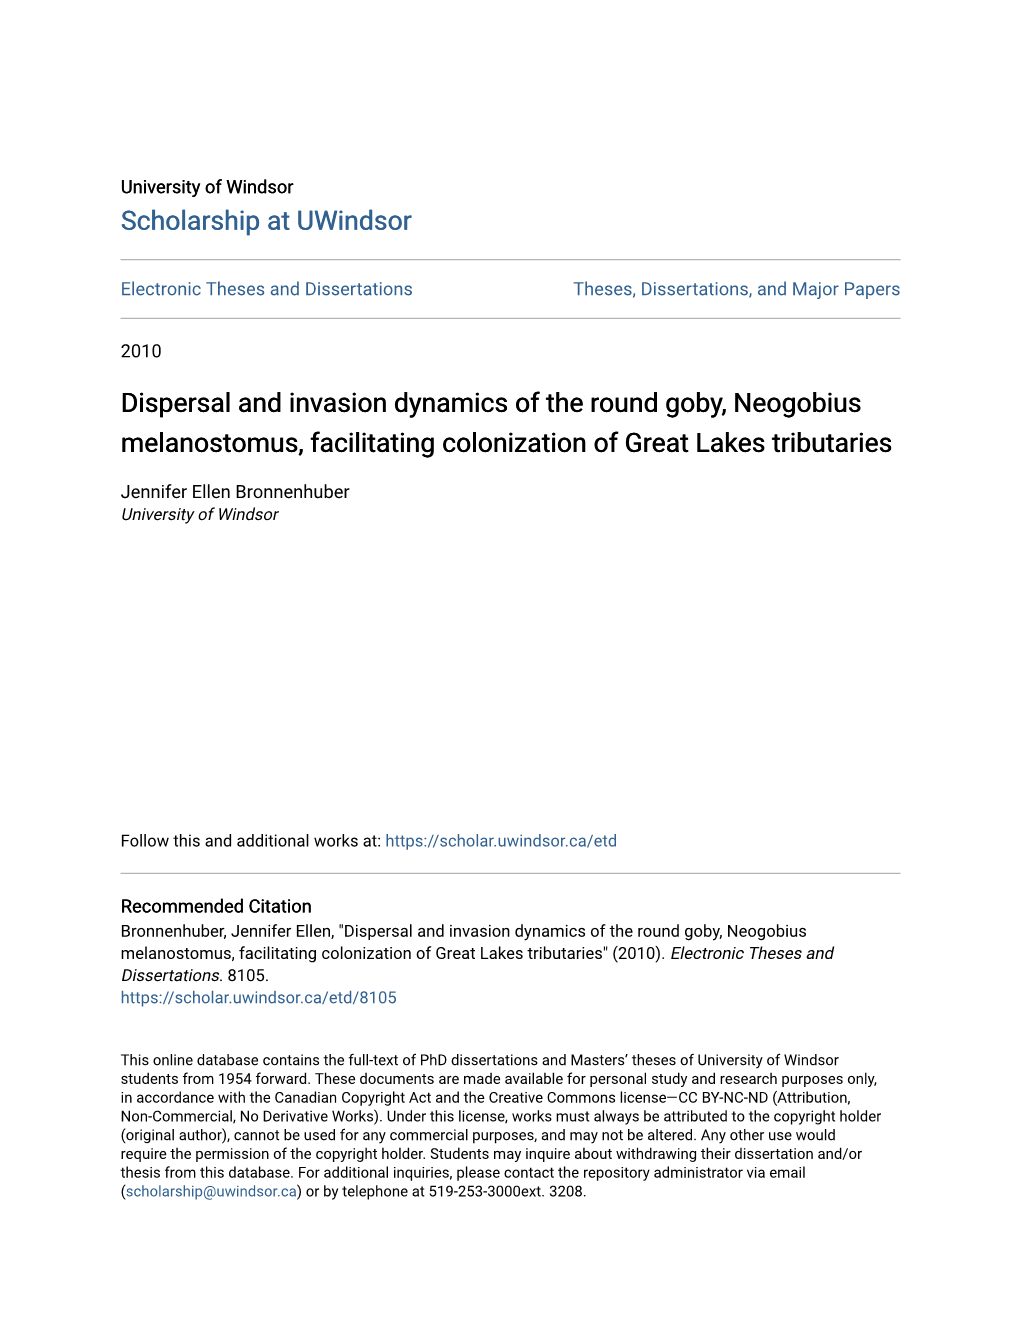 Dispersal and Invasion Dynamics of the Round Goby, Neogobius Melanostomus, Facilitating Colonization of Great Lakes Tributaries